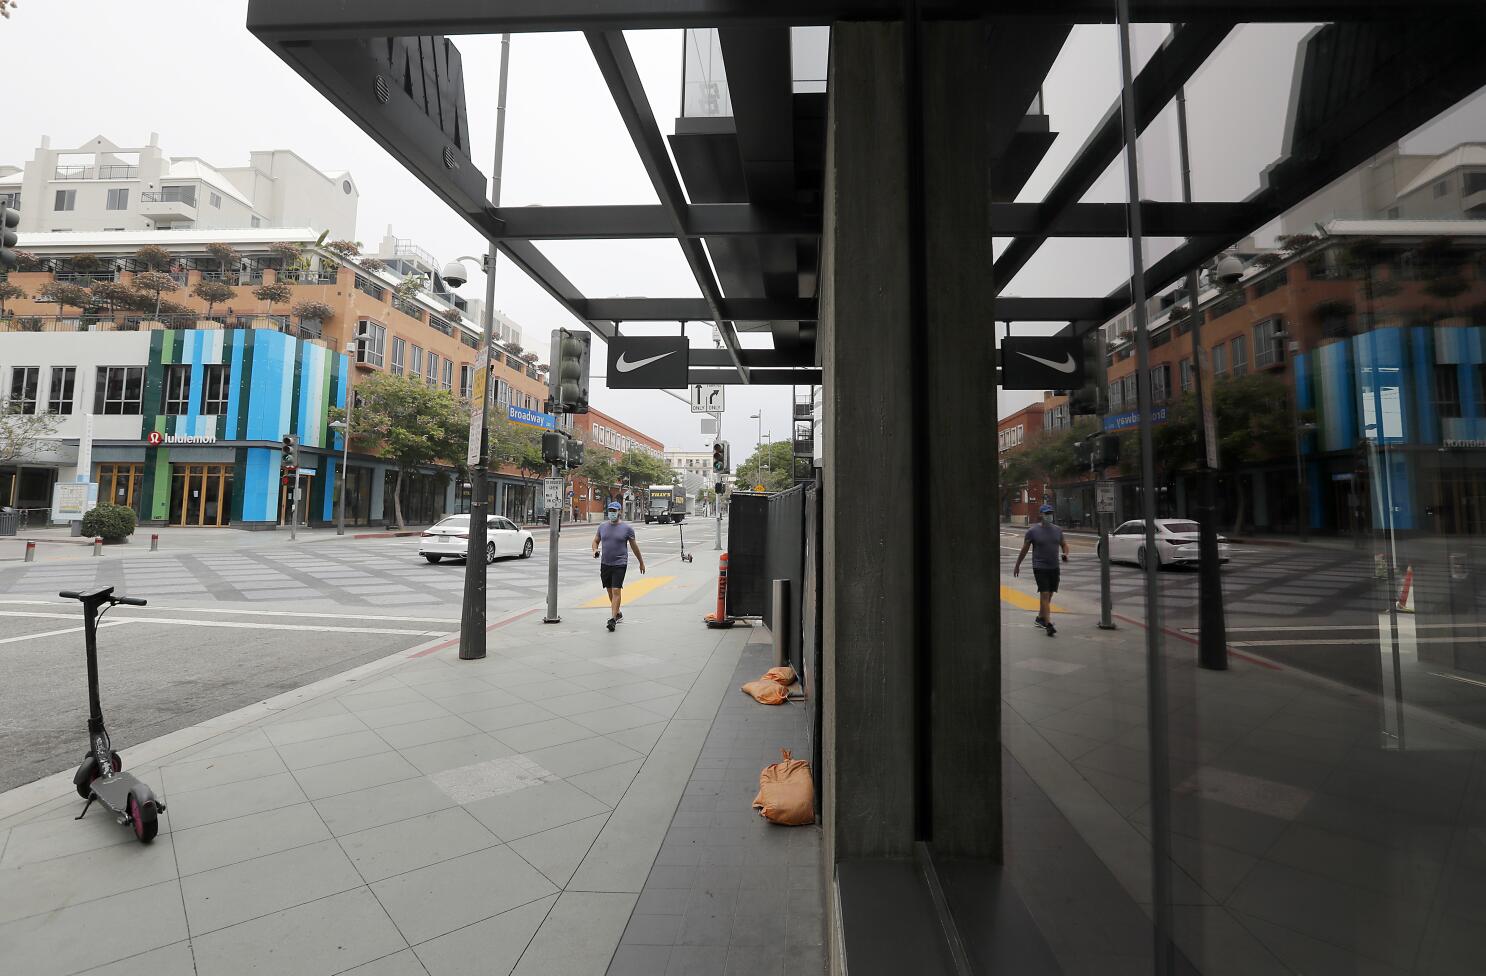 L.A. and other cities are recovering, but not their downtowns. Why